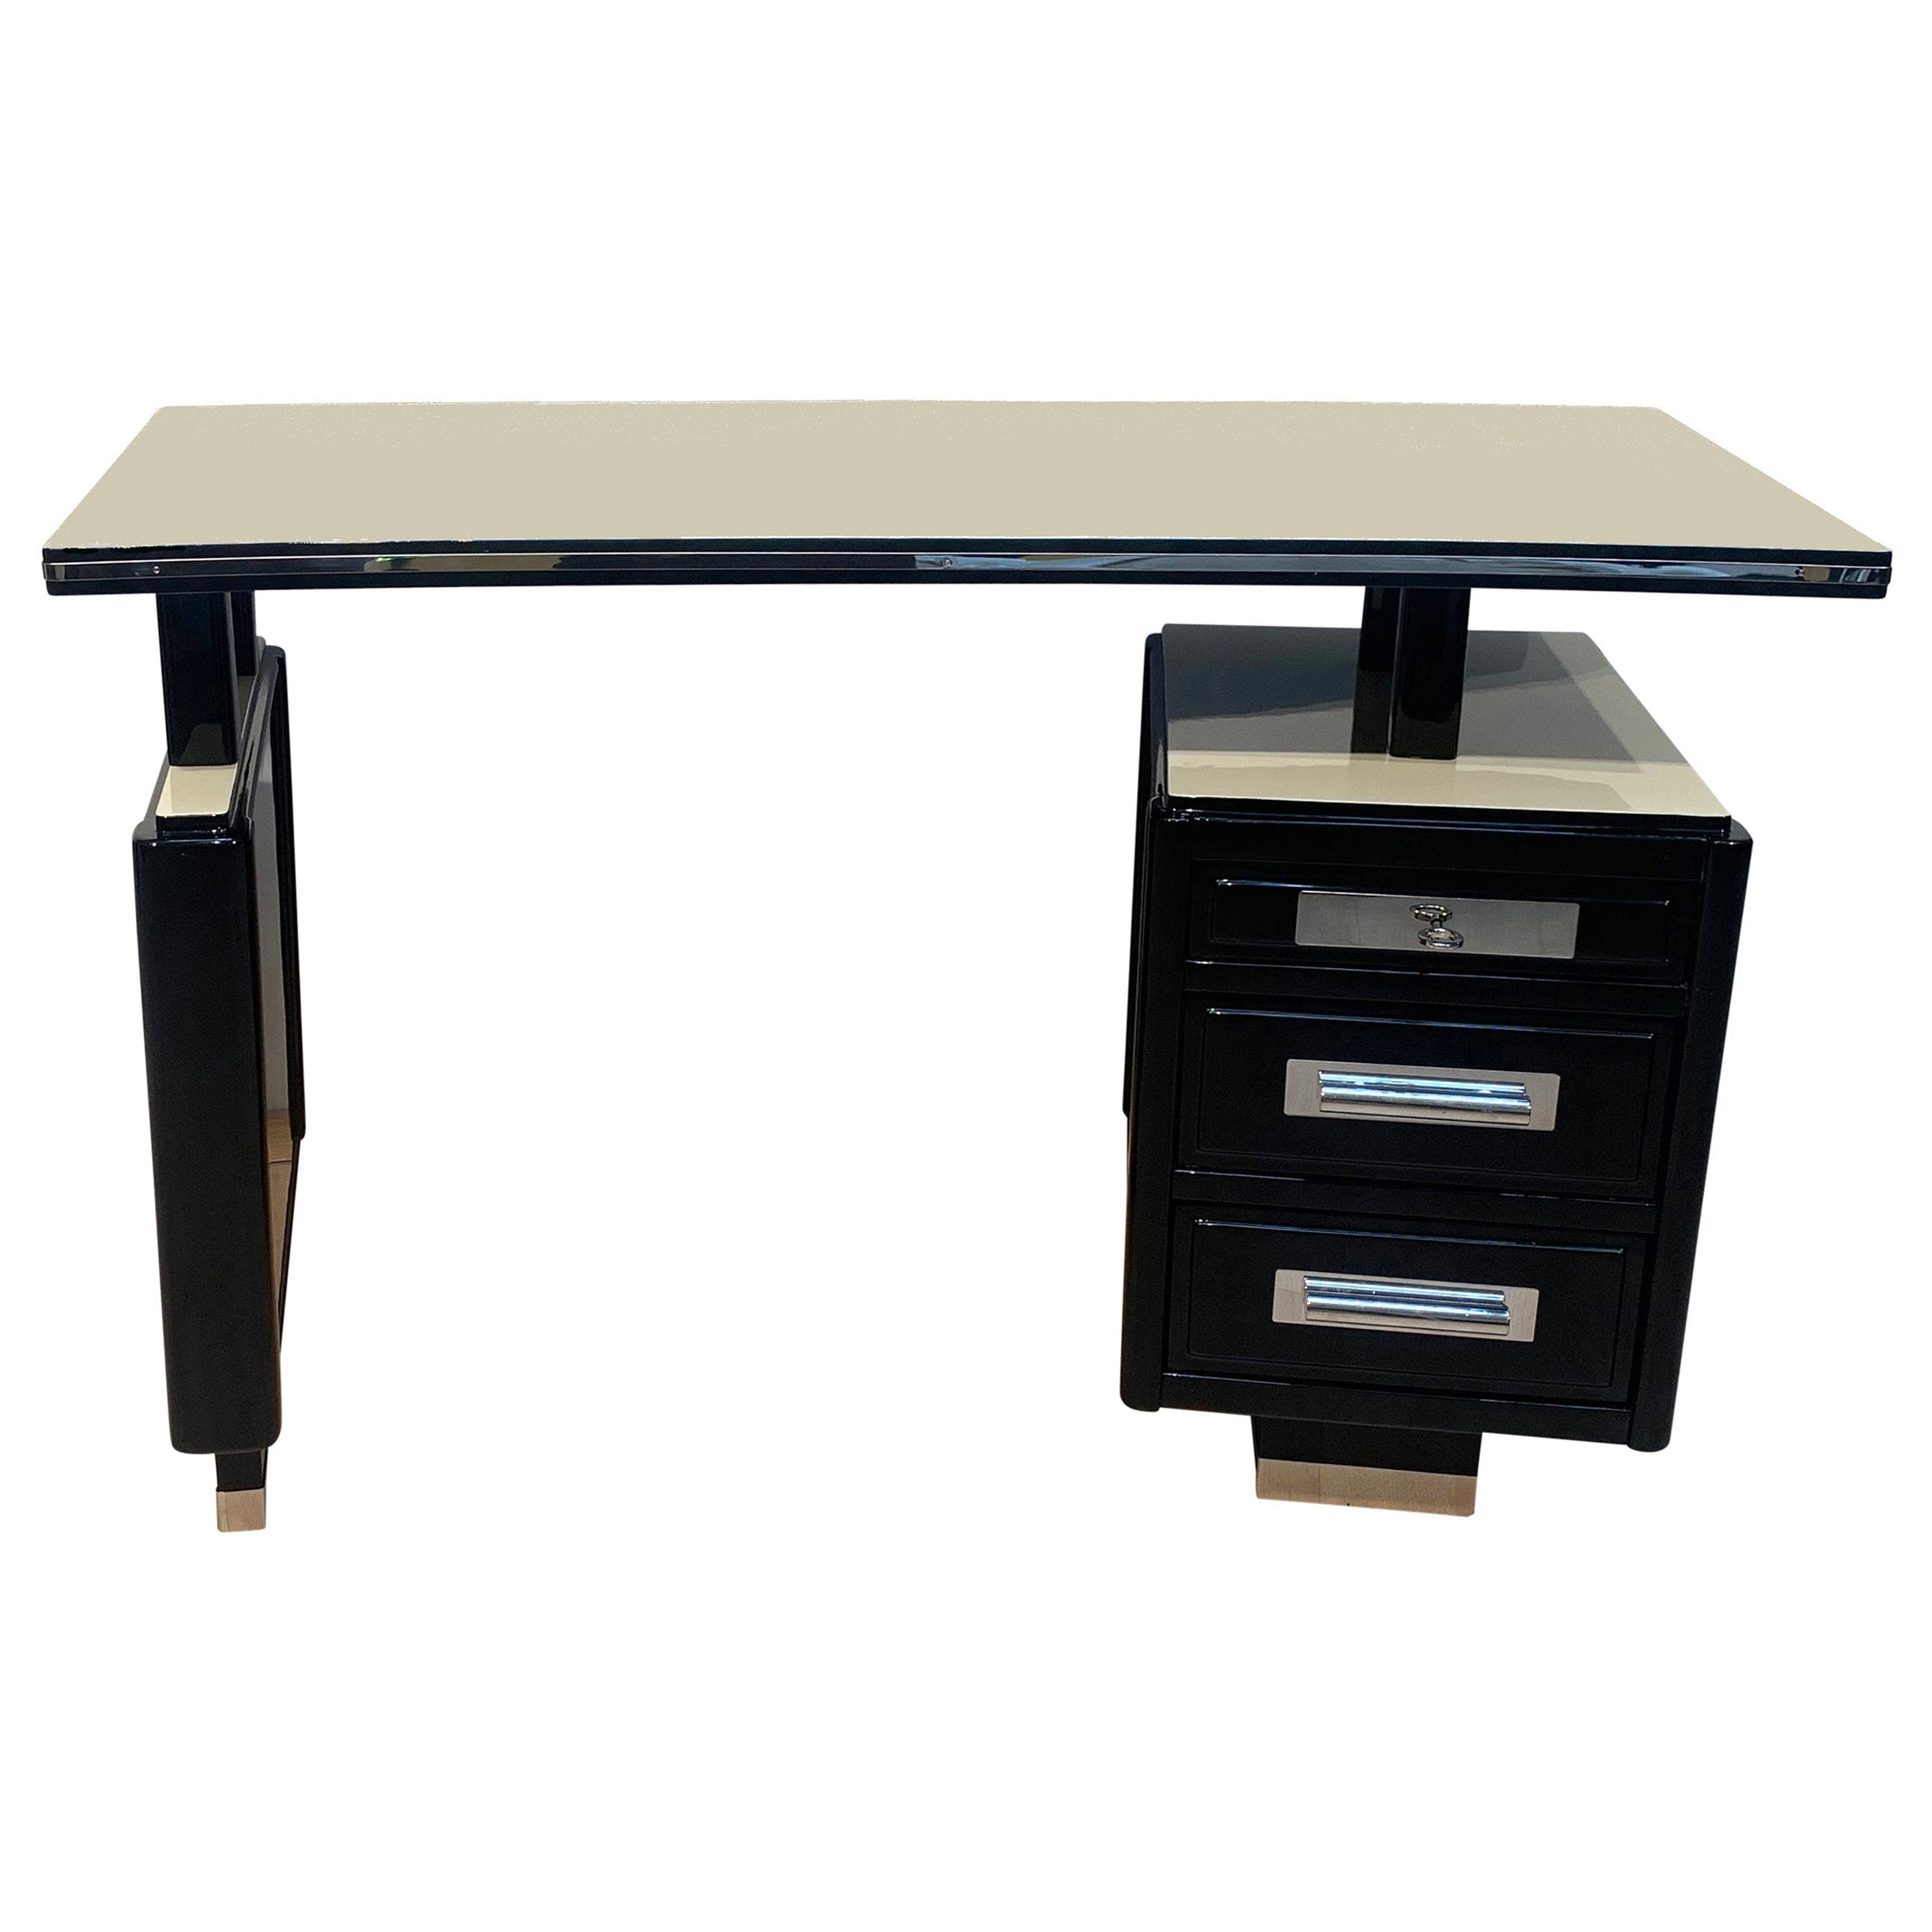 Small Art Deco desk, half-moon shaped, black and white lacquer, France circa 1940.

Oak, black and cream-colored high gloss piano lacquer.

Three drawers, with interesting locking mechanism: Only when the top drawer is slightly drawn outwards, the